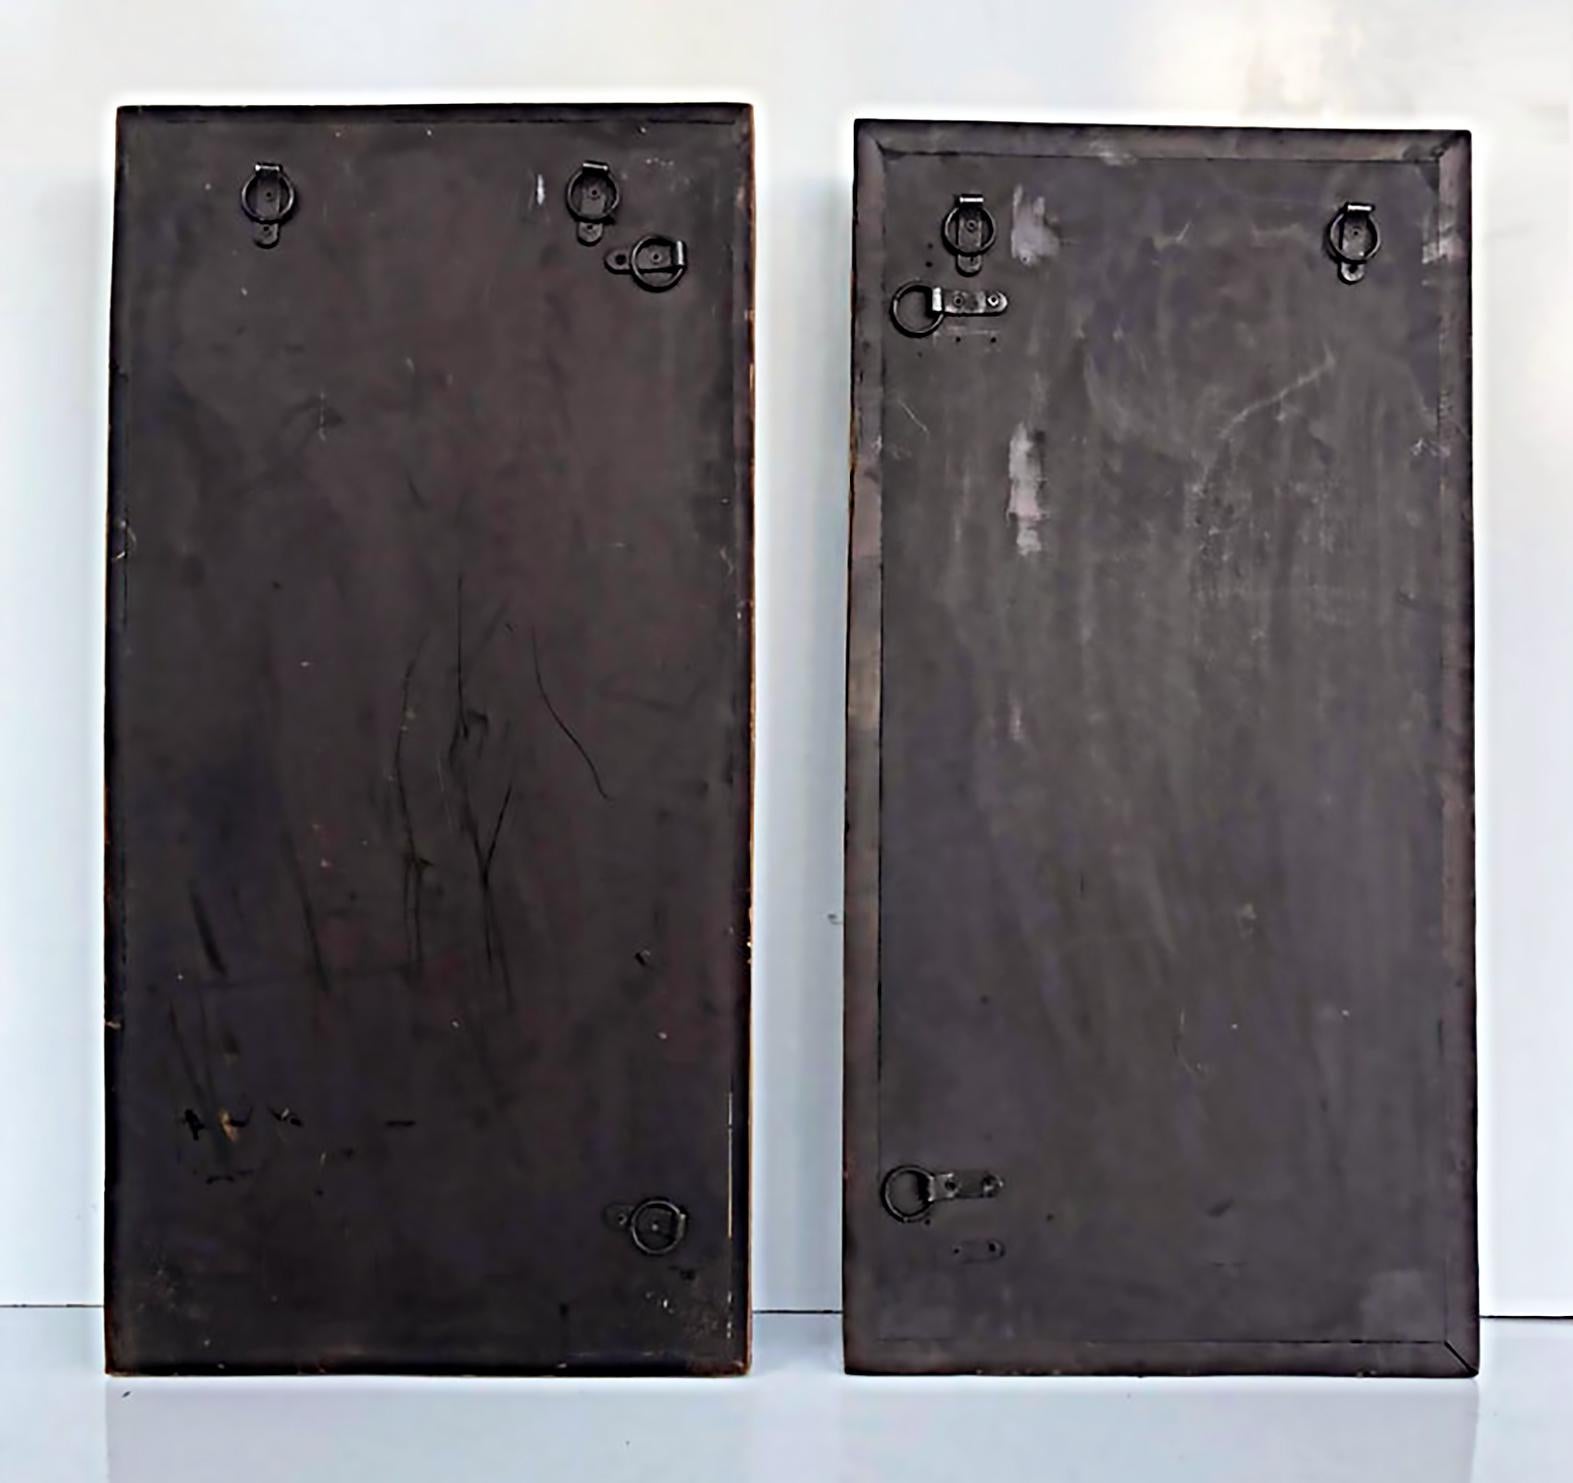 Wood Folk Art Shoe Mold Mounted Wall Sculptures, Vertical / Horizontal, Two Available